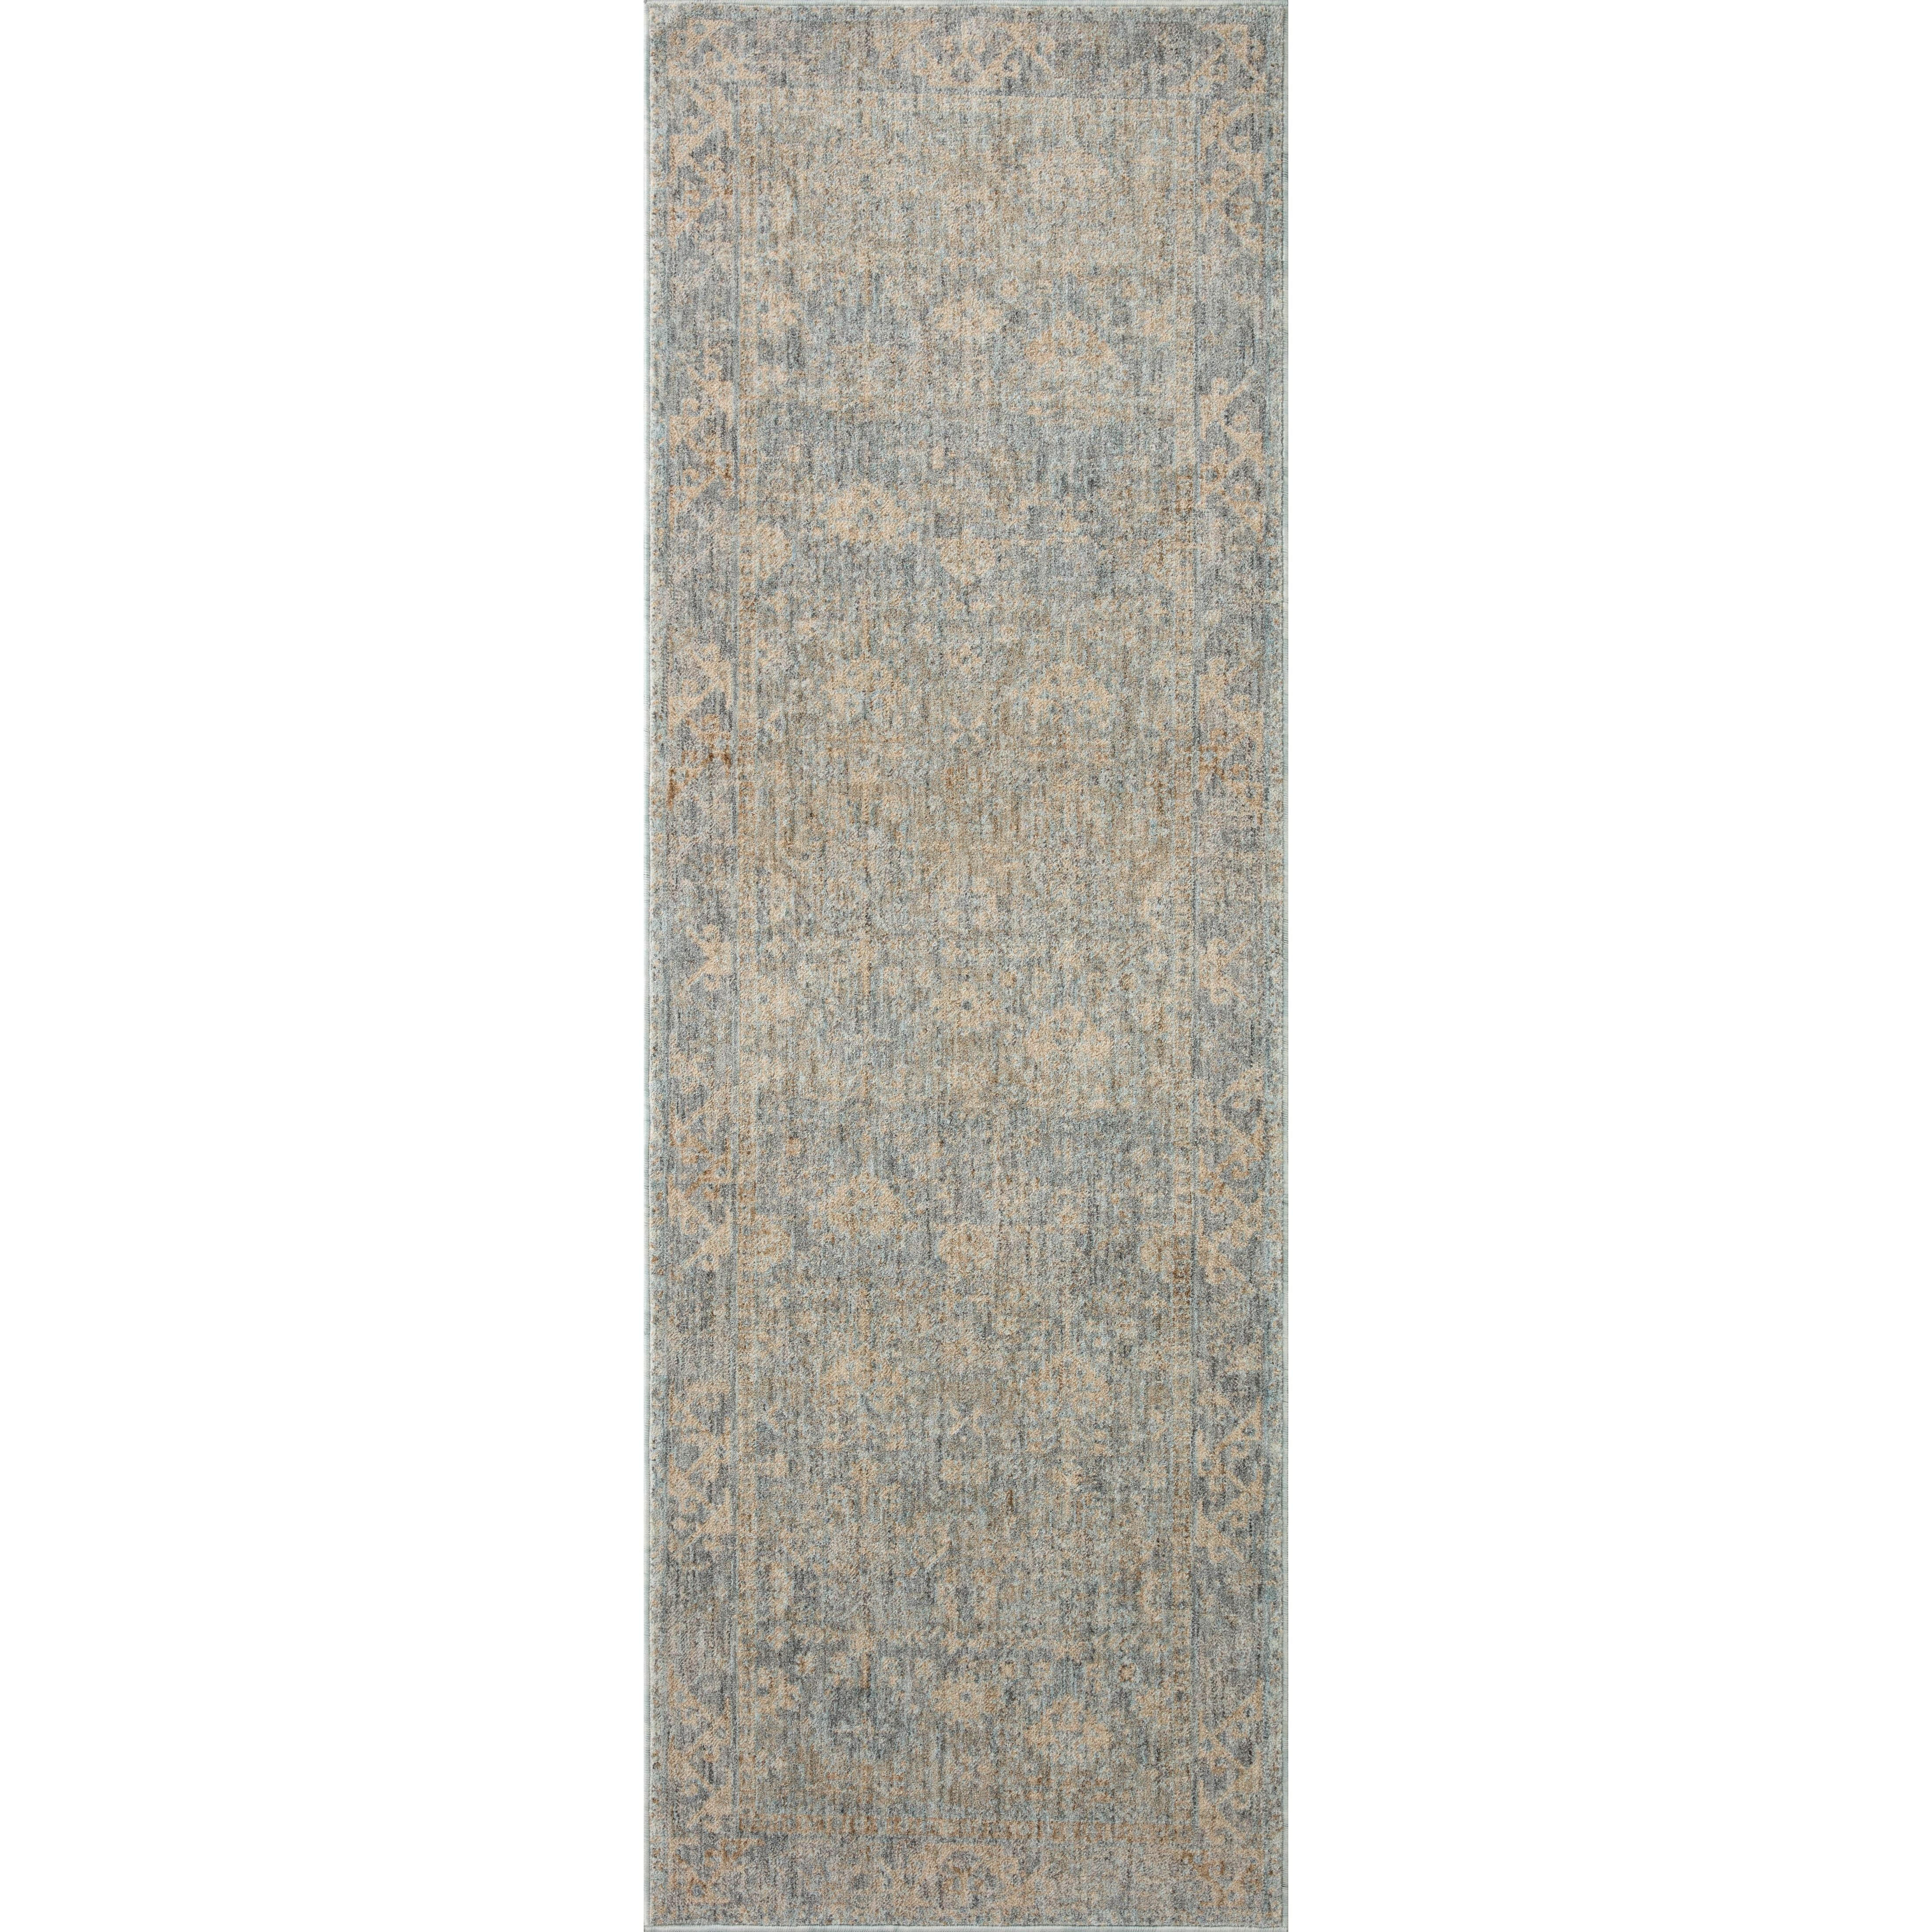 The Angela Rose x Loloi Blake BLA-01 Sky / Beige rug features traditional motifs that have softened into the background, making it an effortless neutral in any room. Muted earth-toned palettes complement a range of furniture, while subtle cream-colored fringe at the edges add texture and framing. Amethyst favorite! Amethyst Home provides interior design services, furniture, rugs, and lighting in the Seattle metro area.